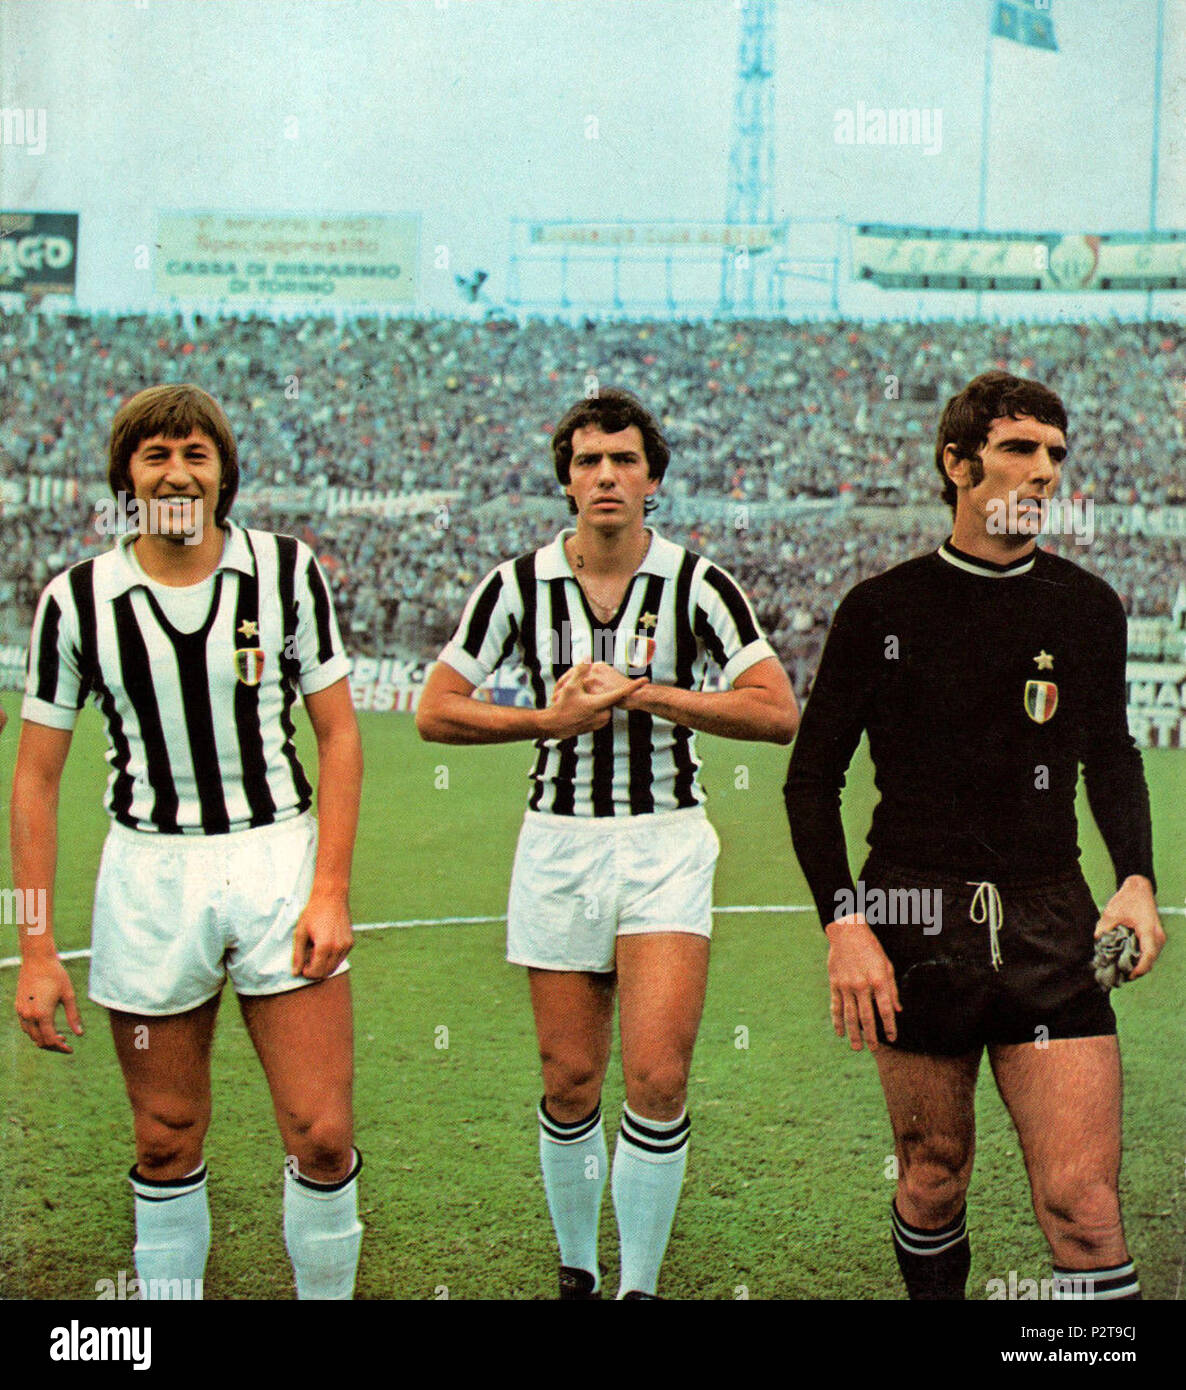 . From left to right, Juventus FC players Gianpietro Marchetti, Roberto Bettega e Dino Zoff before a match at Stadio Comunale in Turin (nowadays Stadio Olimpico) . 1973. Unknown 44 Juventus FC - 1973 - G. Marchetti, R. Bettega, D. Zoff Stock Photo